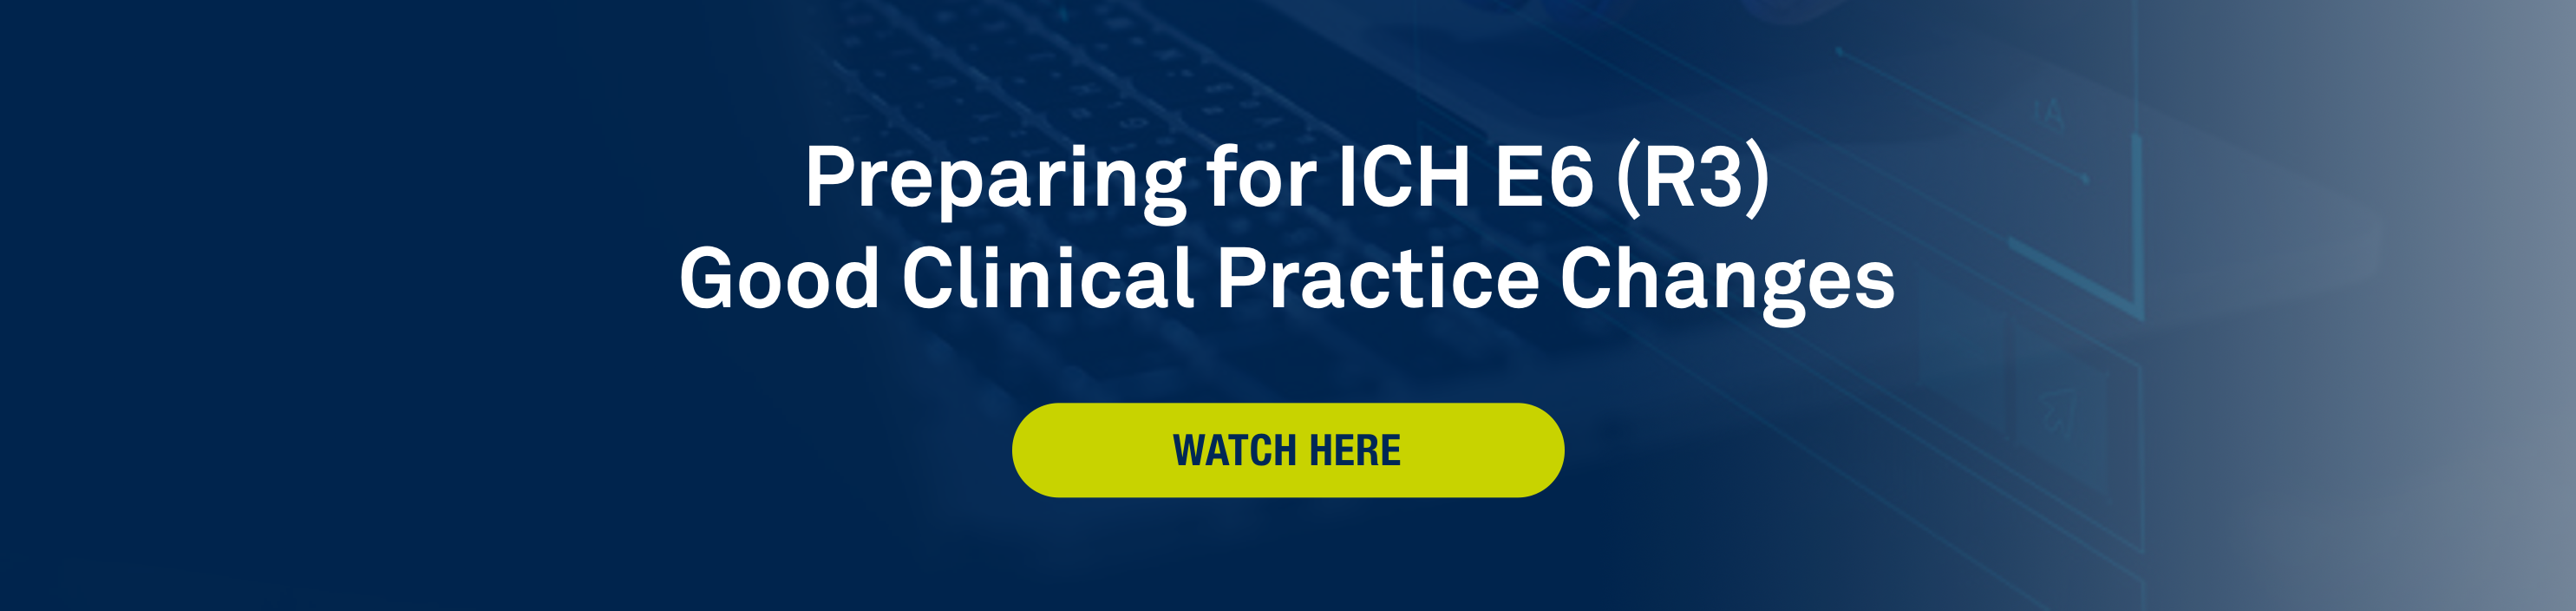 Preparing for ICH E6 (R3) Good Clinical Practice Changes